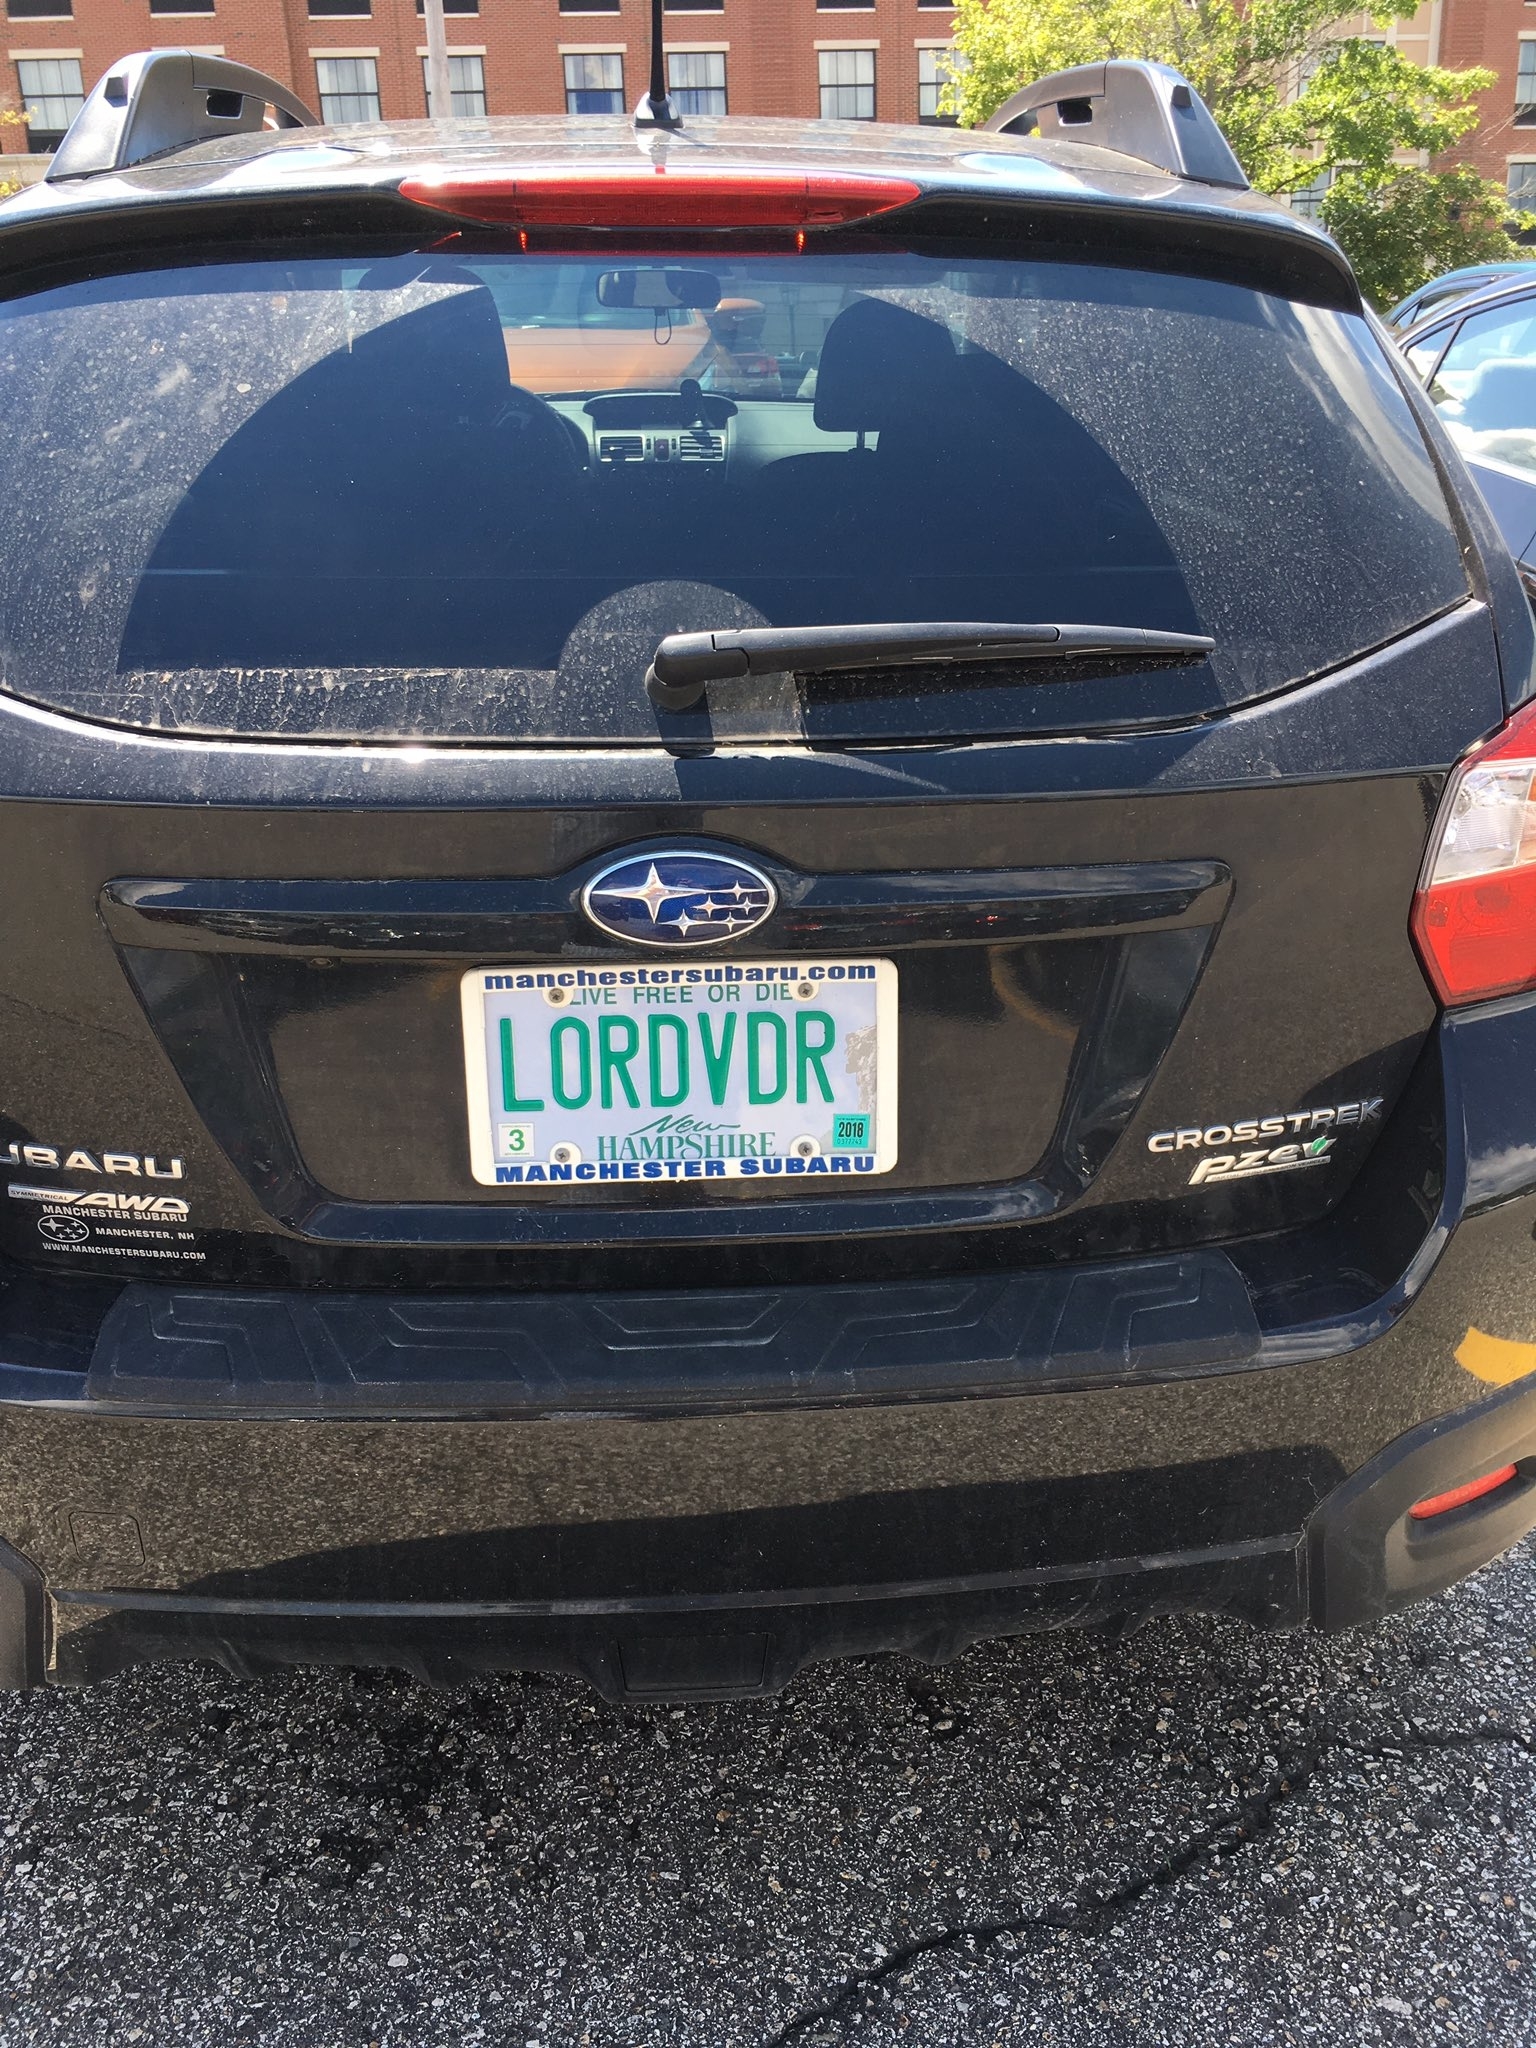 Car with license plate reading &quot;LORDVDR.&quot;